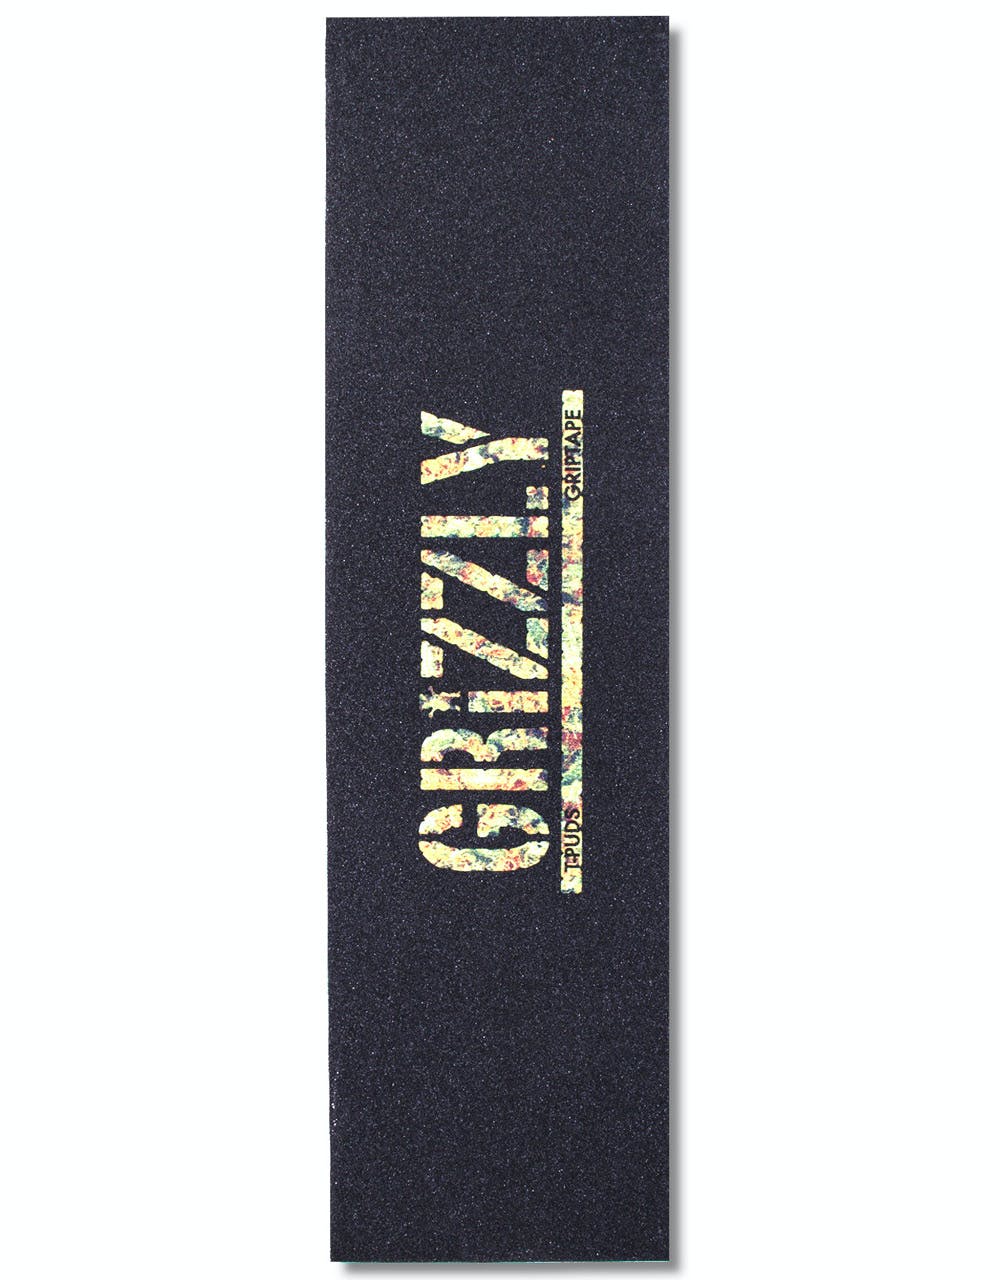 Grizzly Pudwill Stamp Pro 9" Grip Tape Sheet